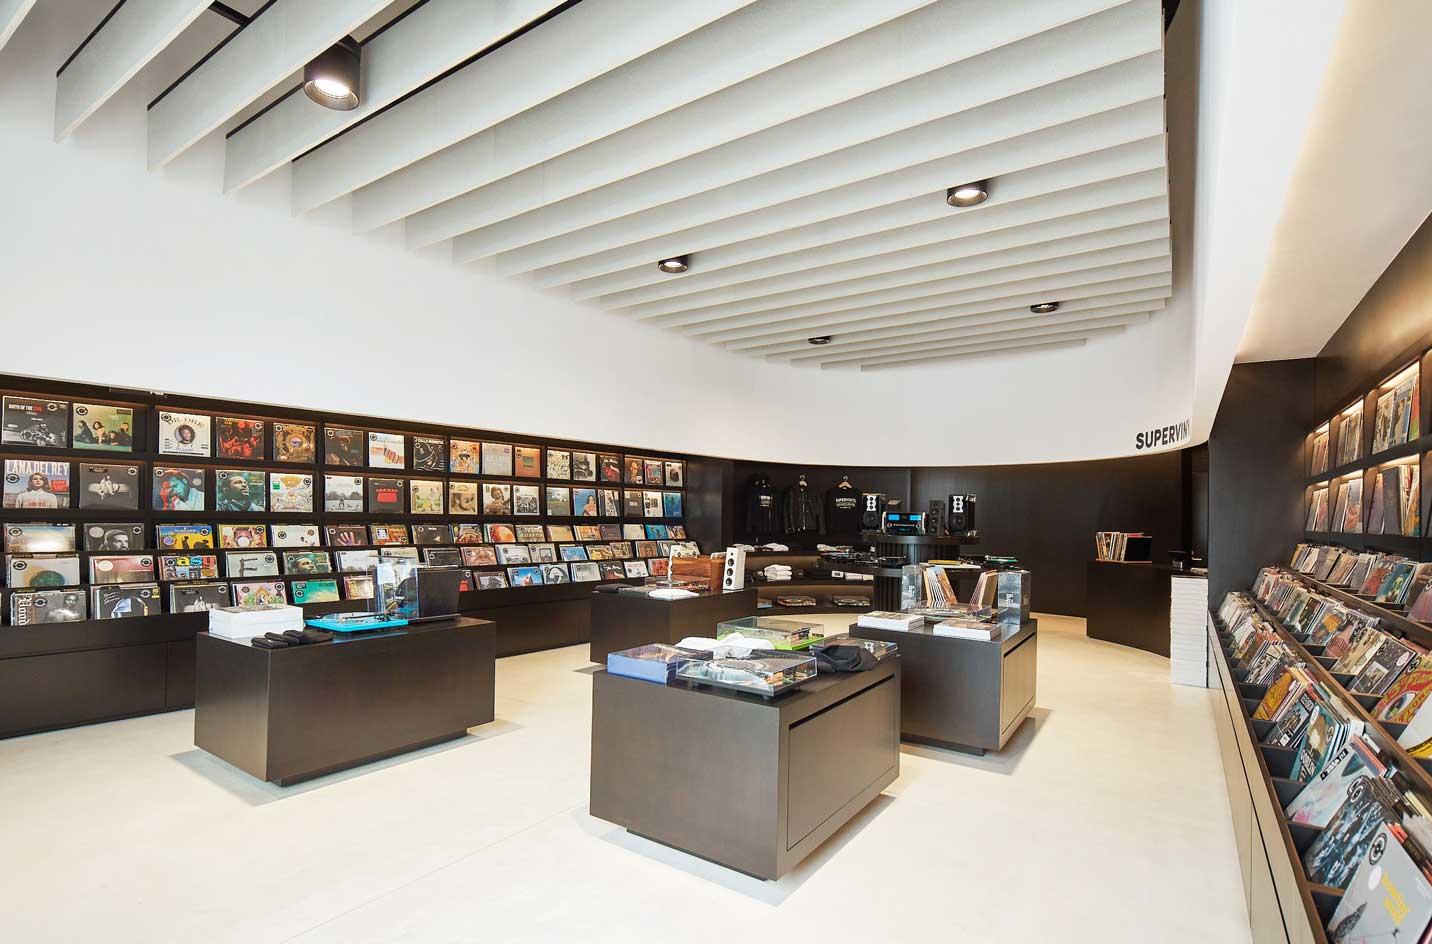 Supervinyl sets the record straight in Los Angeles